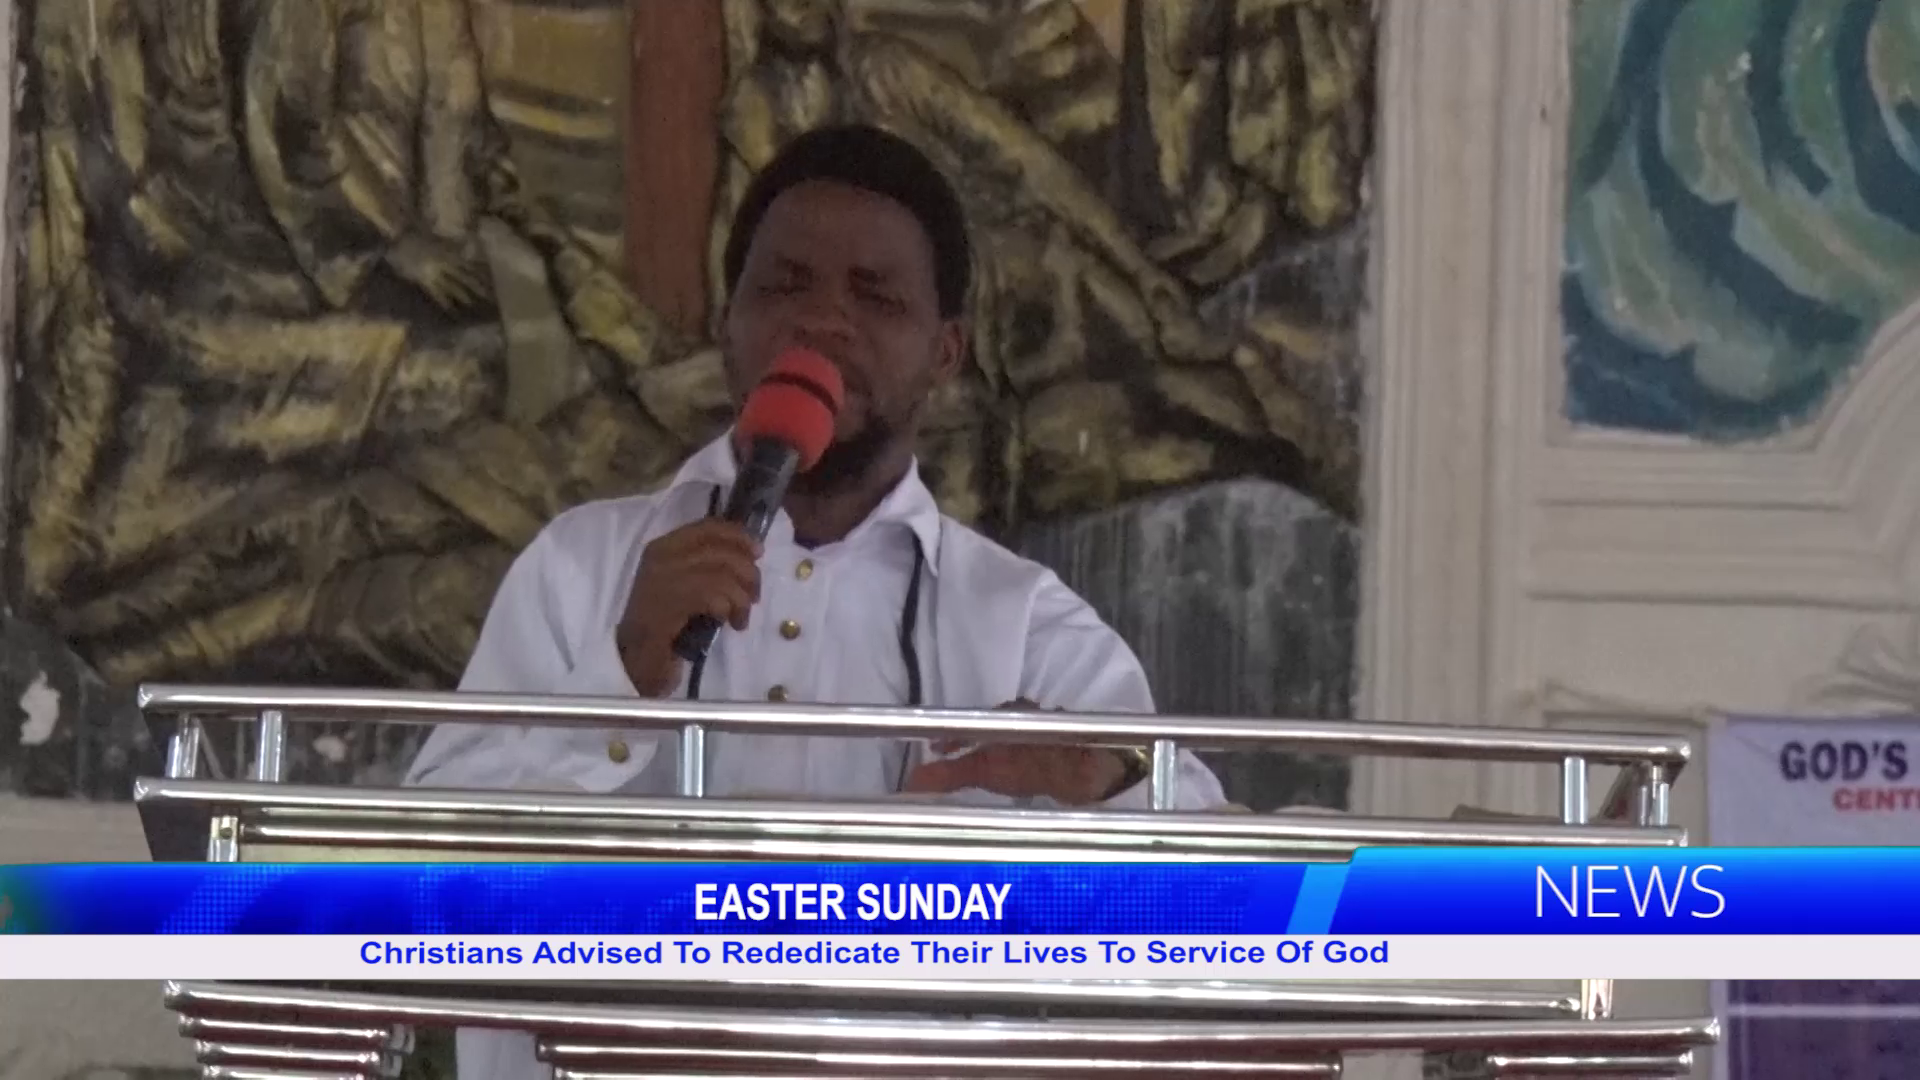 Christians Advised To Rededicate Their Lives To Service Of God